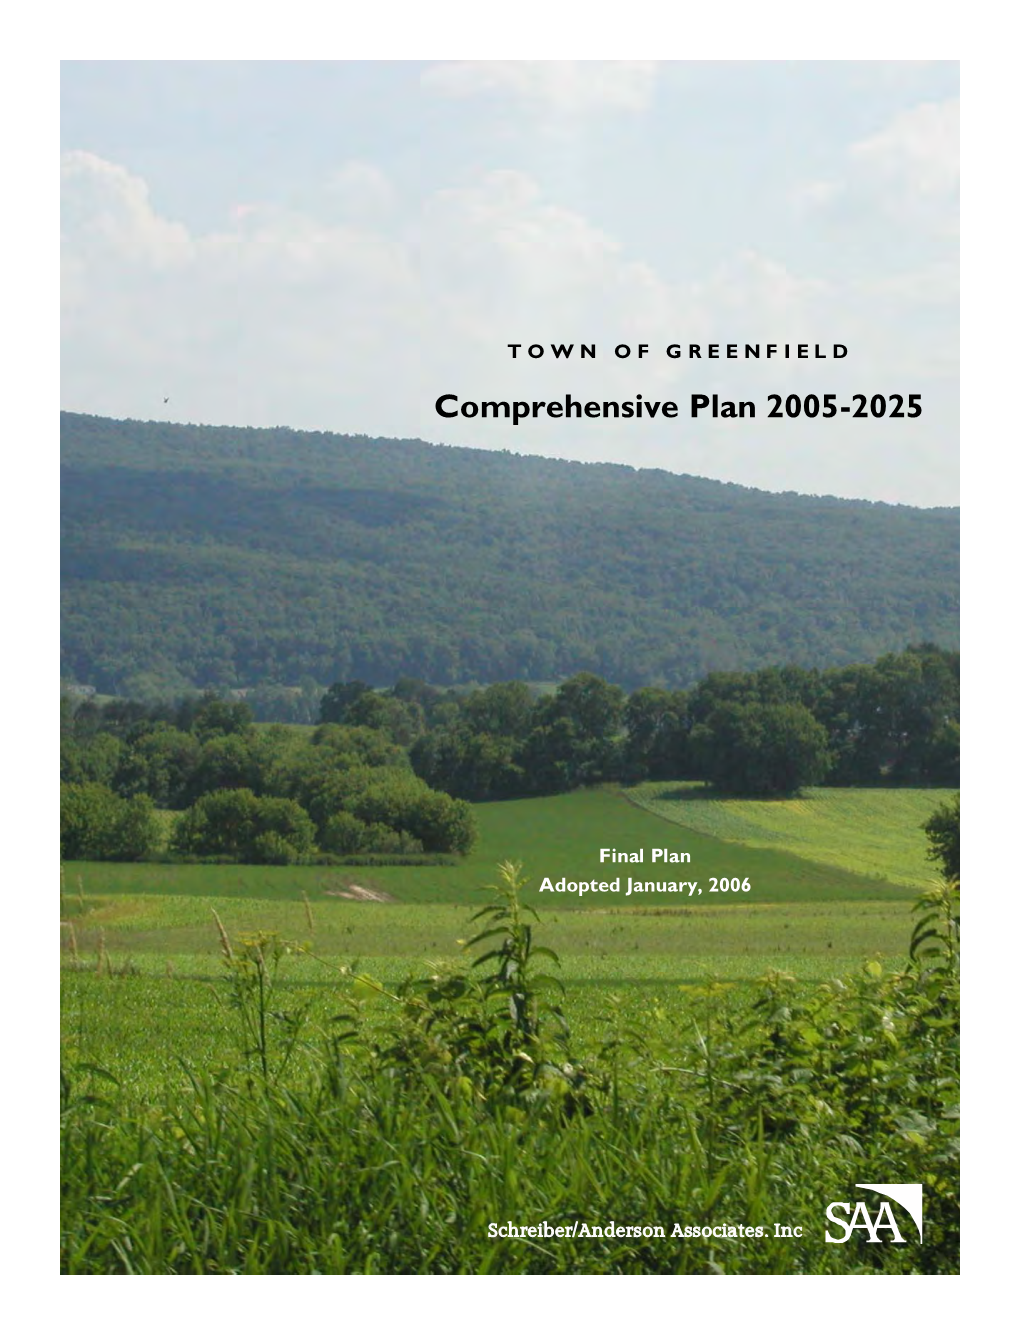 Town of Greenfield Comprehensive Plan 2005-2025